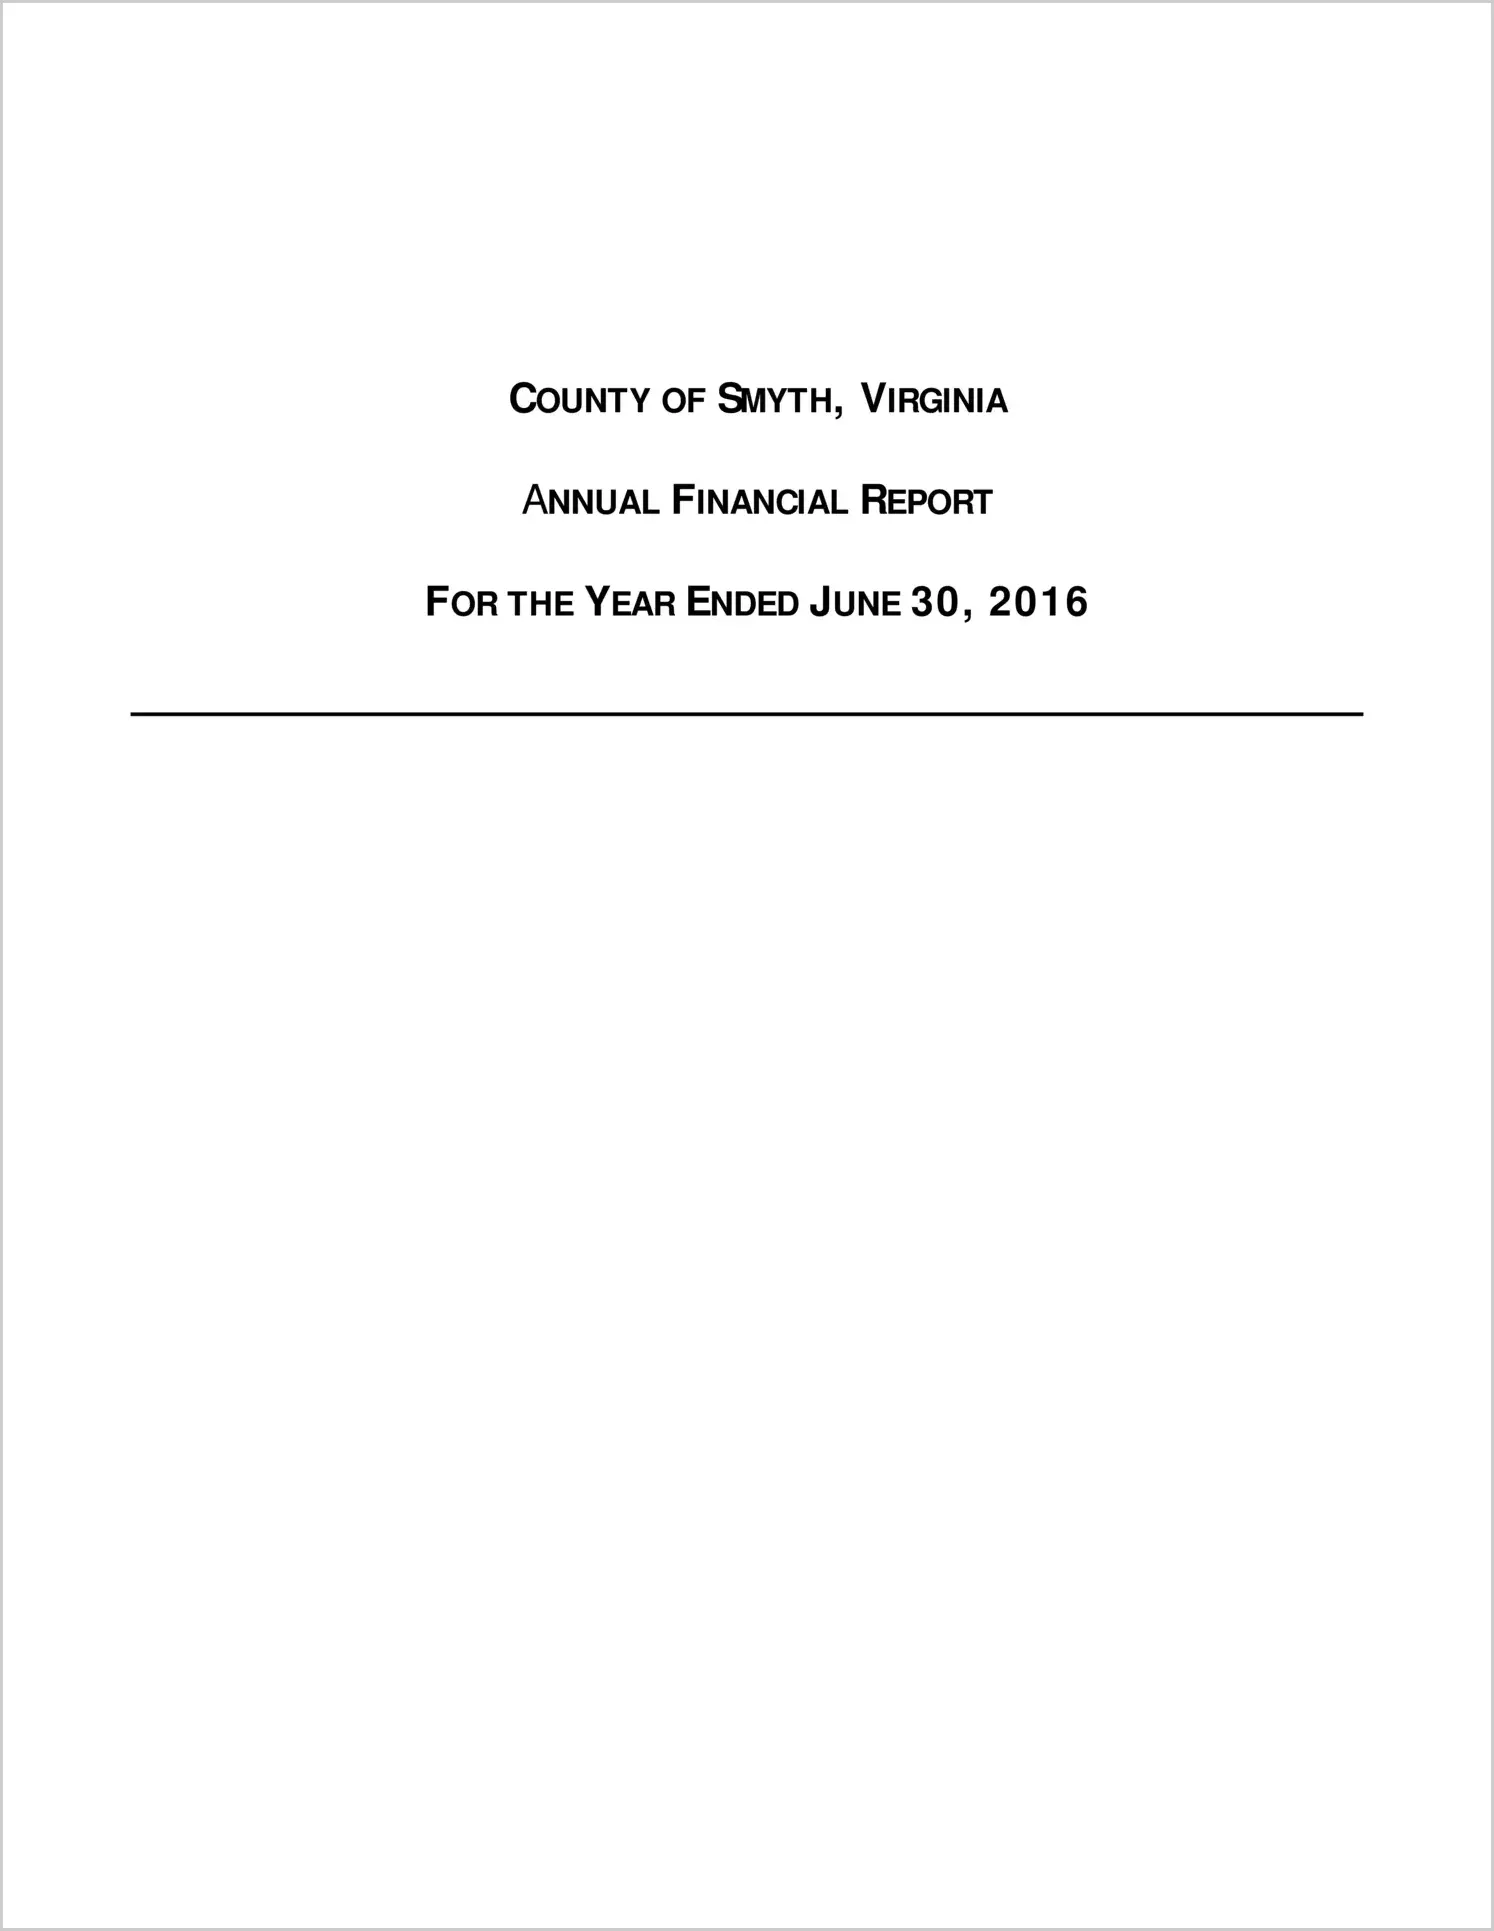 2016 Annual Financial Report for County of Smyth